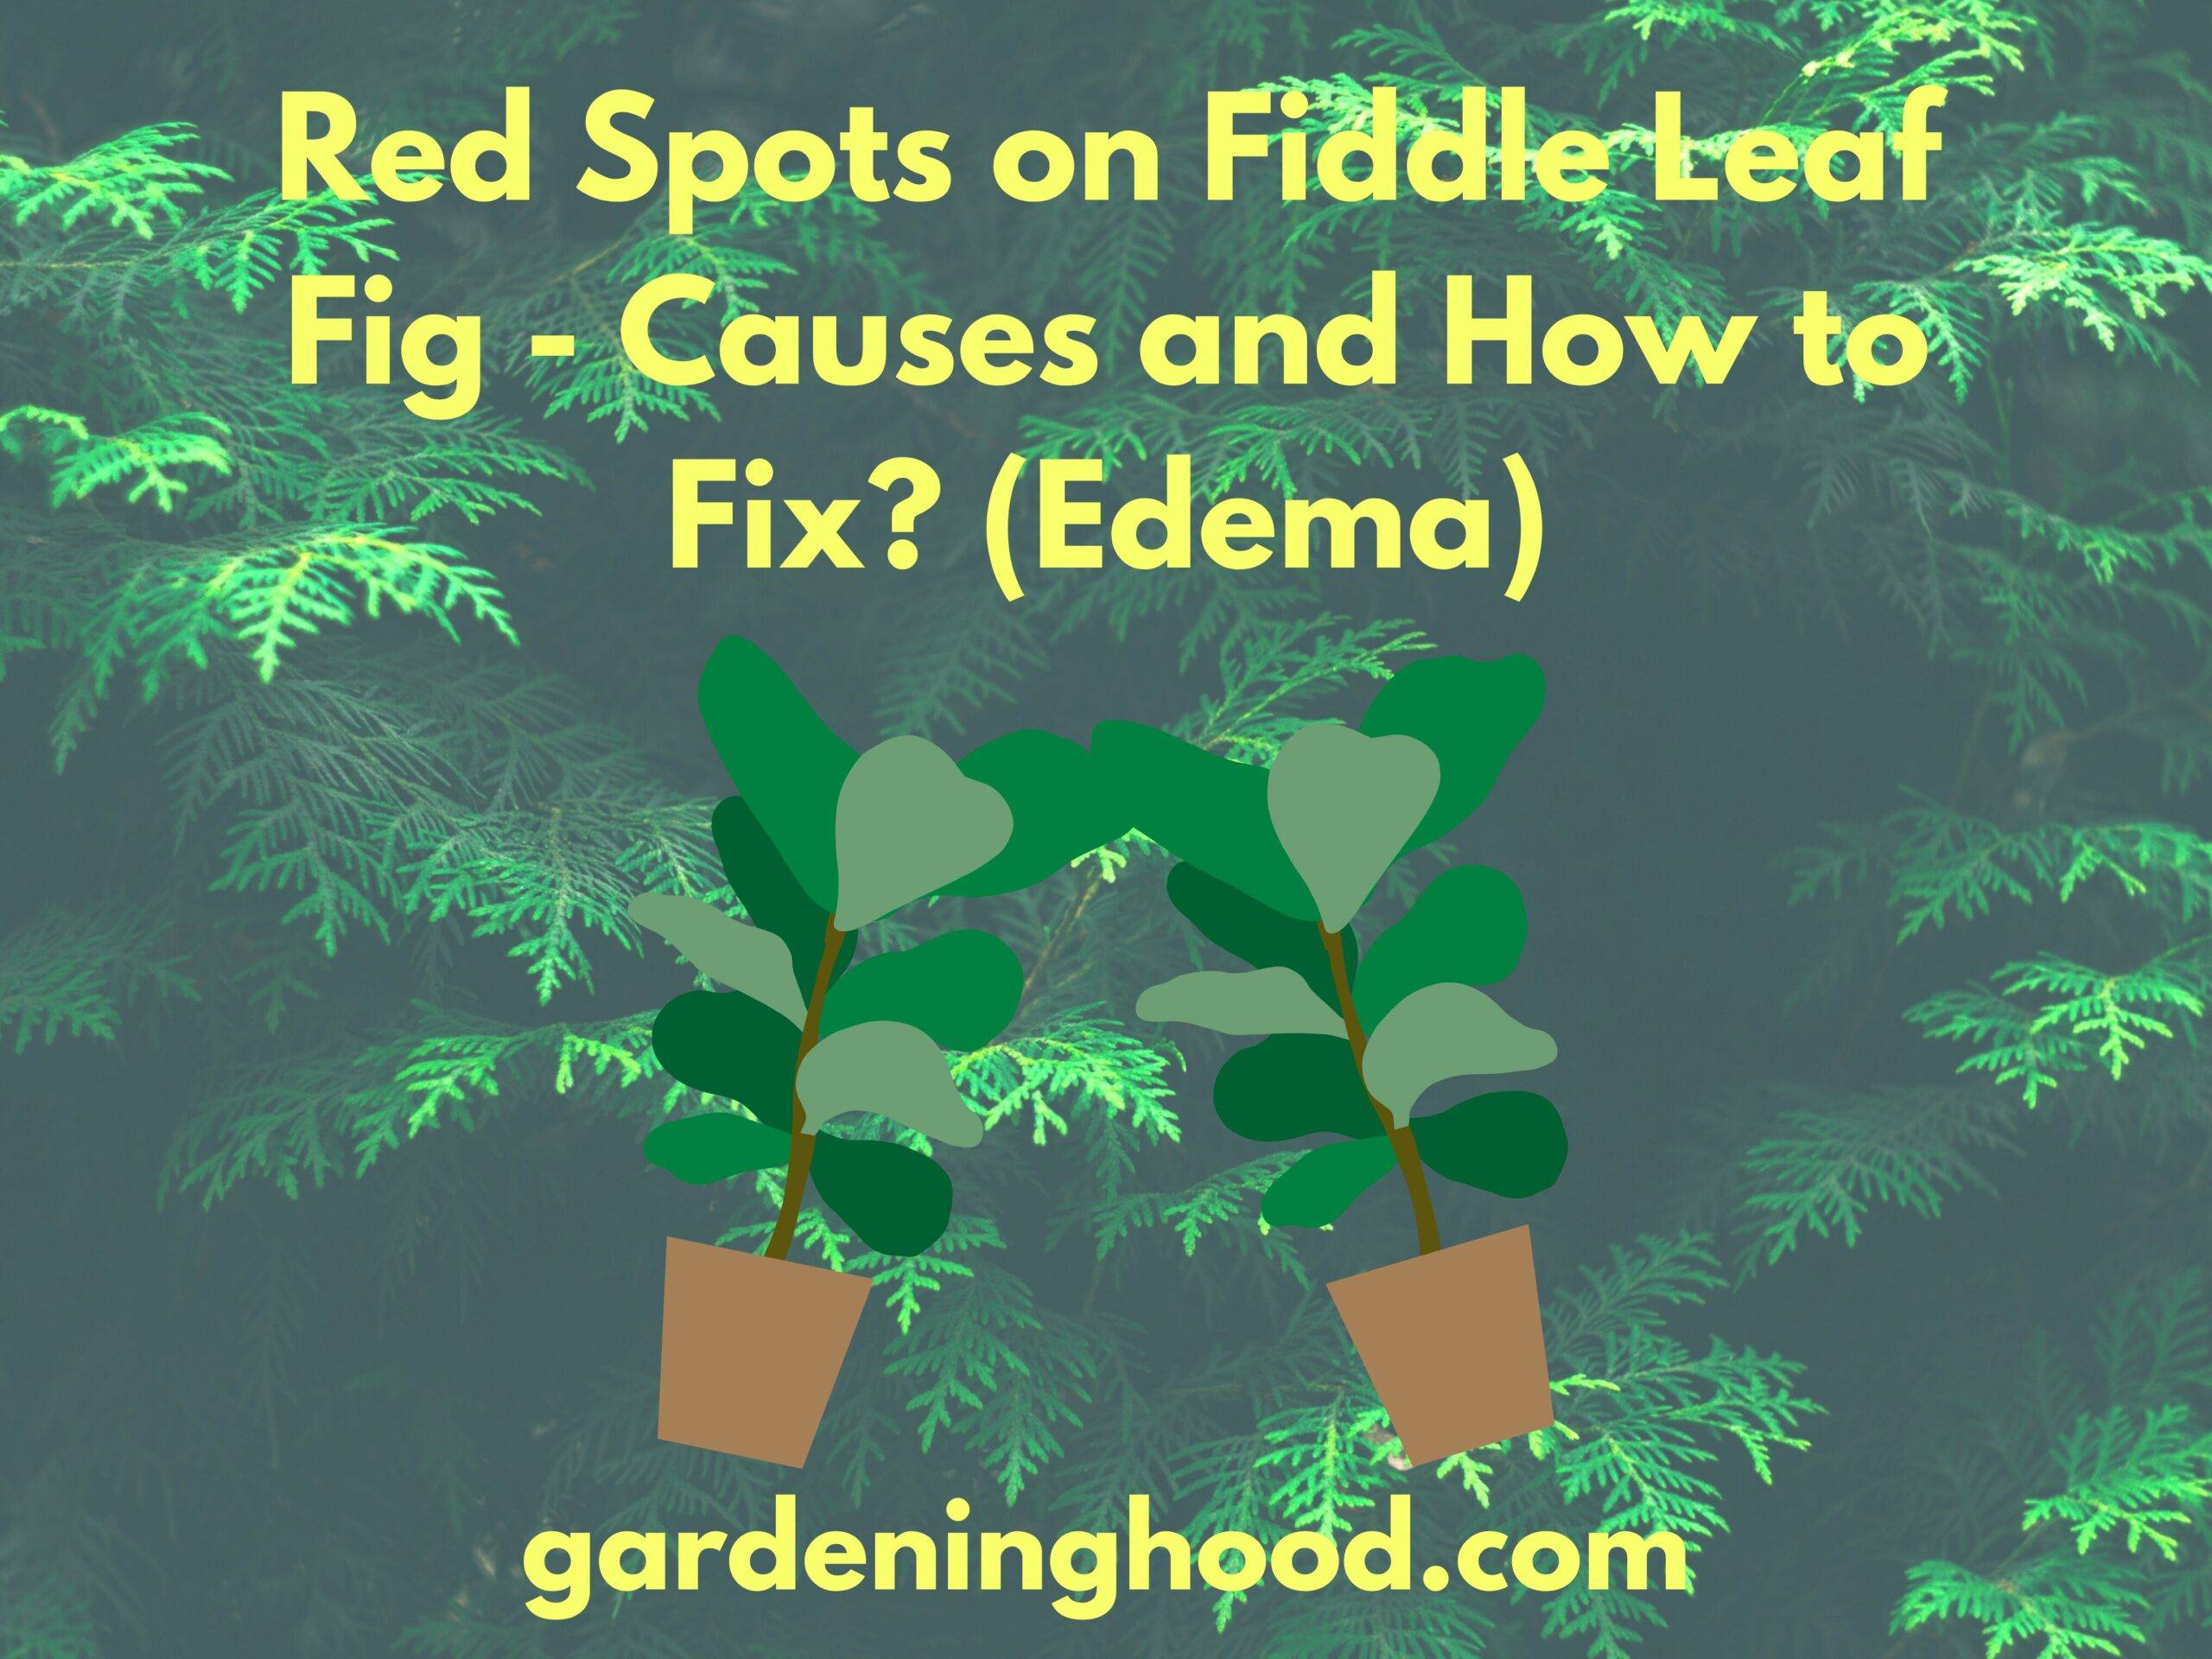 Red Spots on Fiddle Leaf Fig - Causes and How to Fix? (Edema)